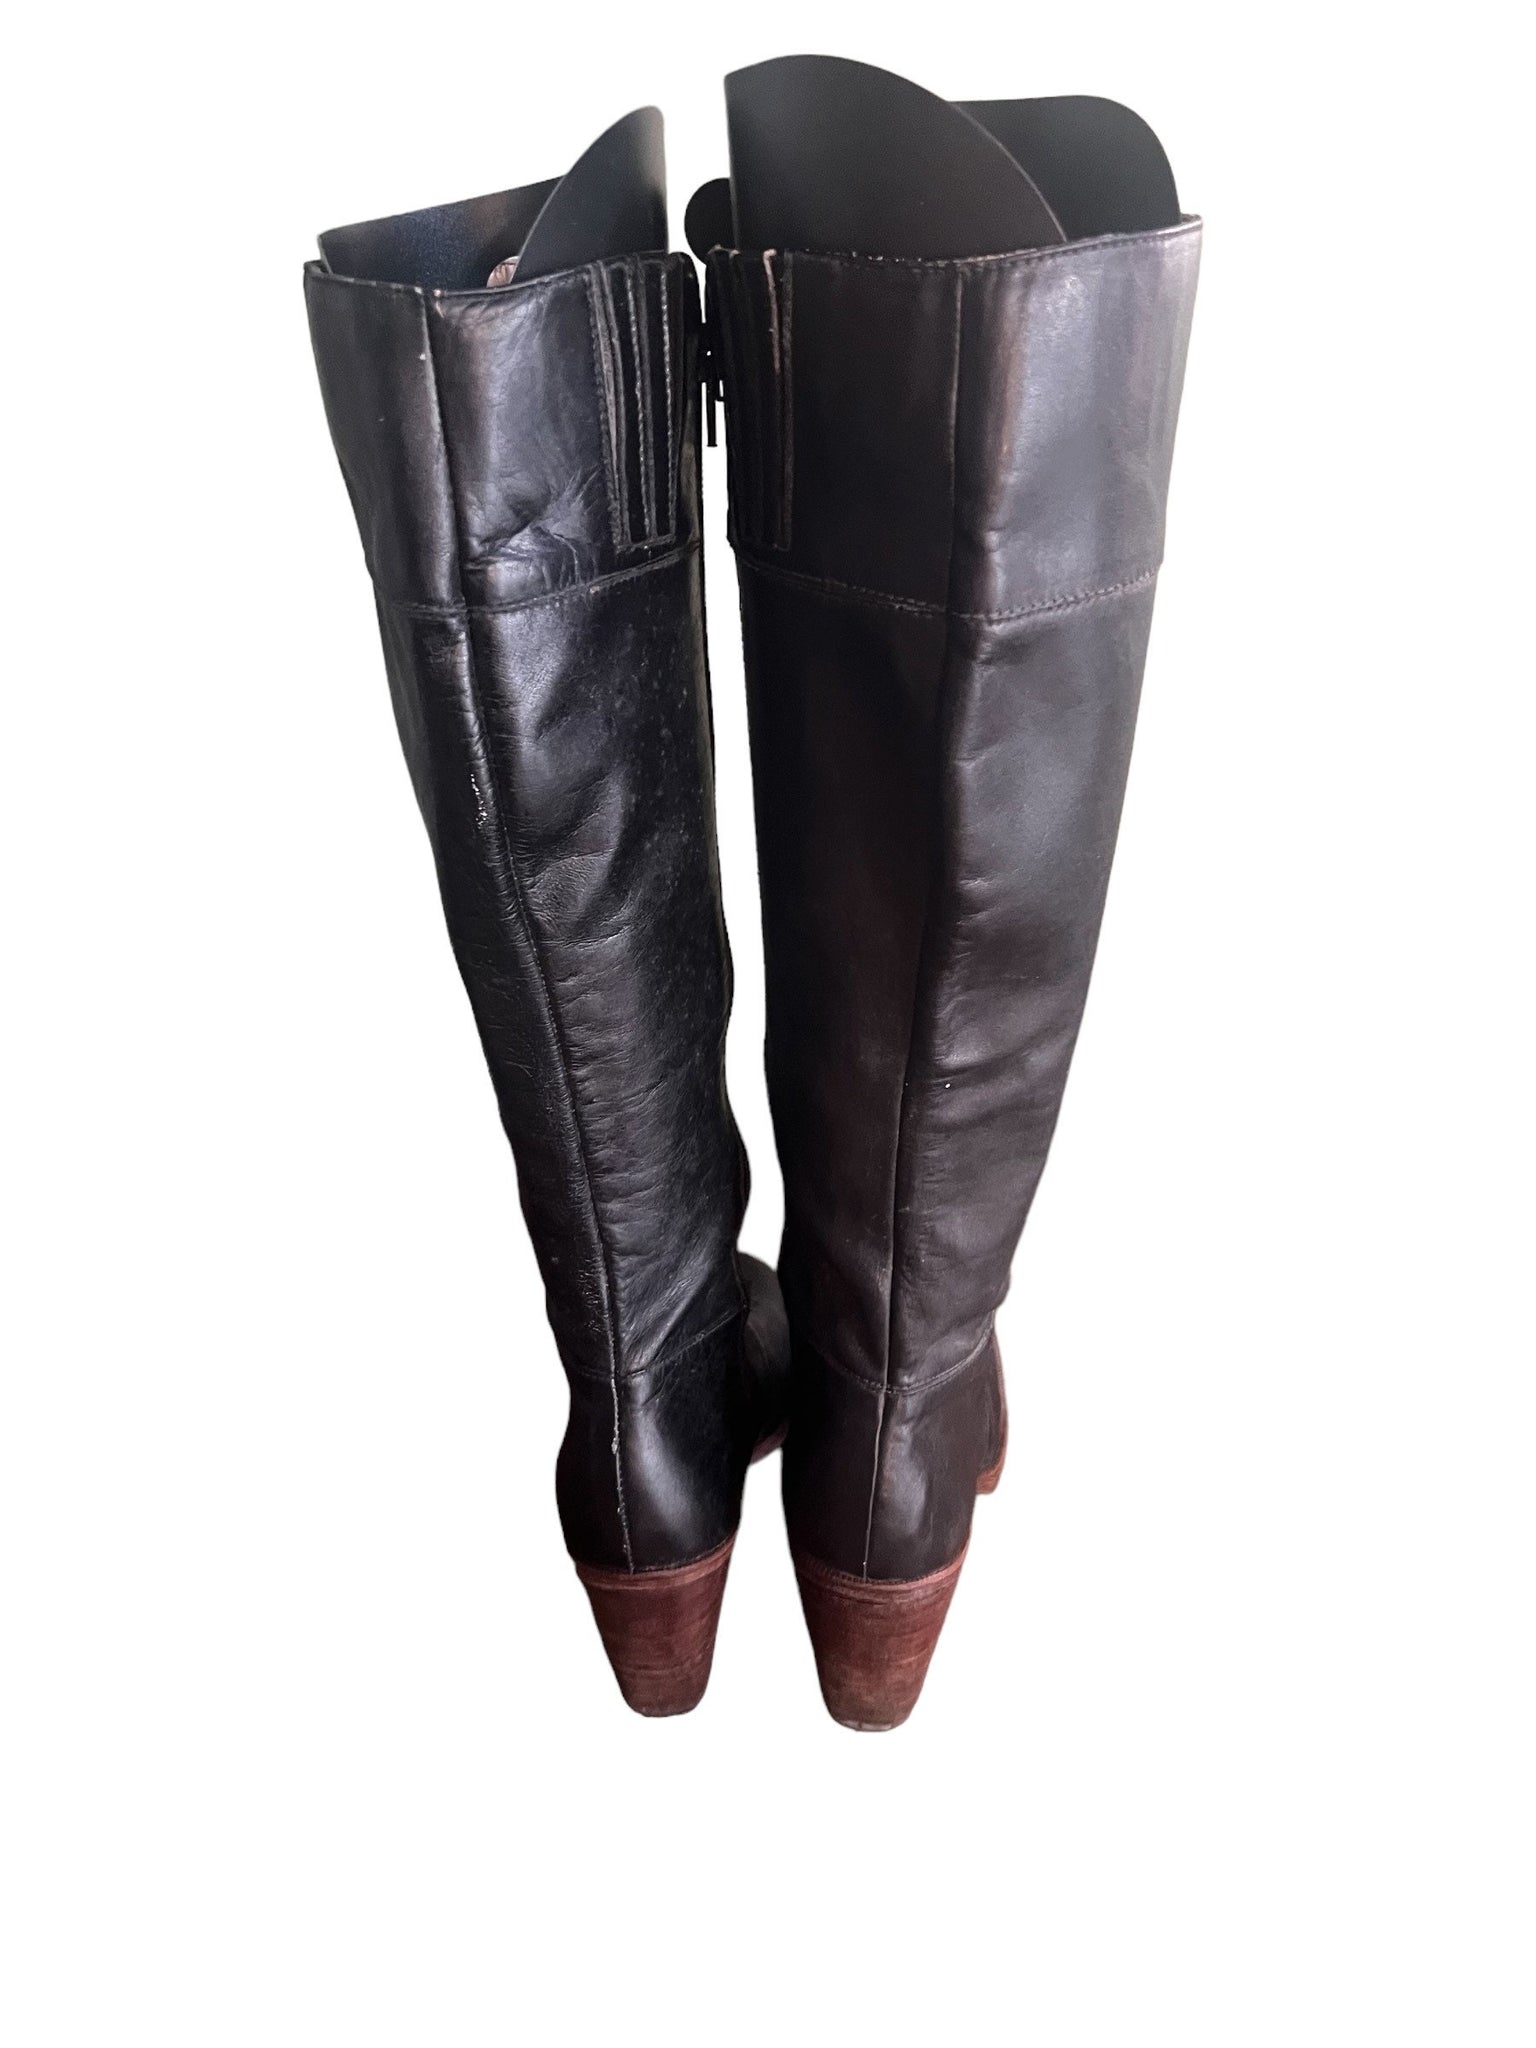 Vintage 70's black knee high boots Imperial 5